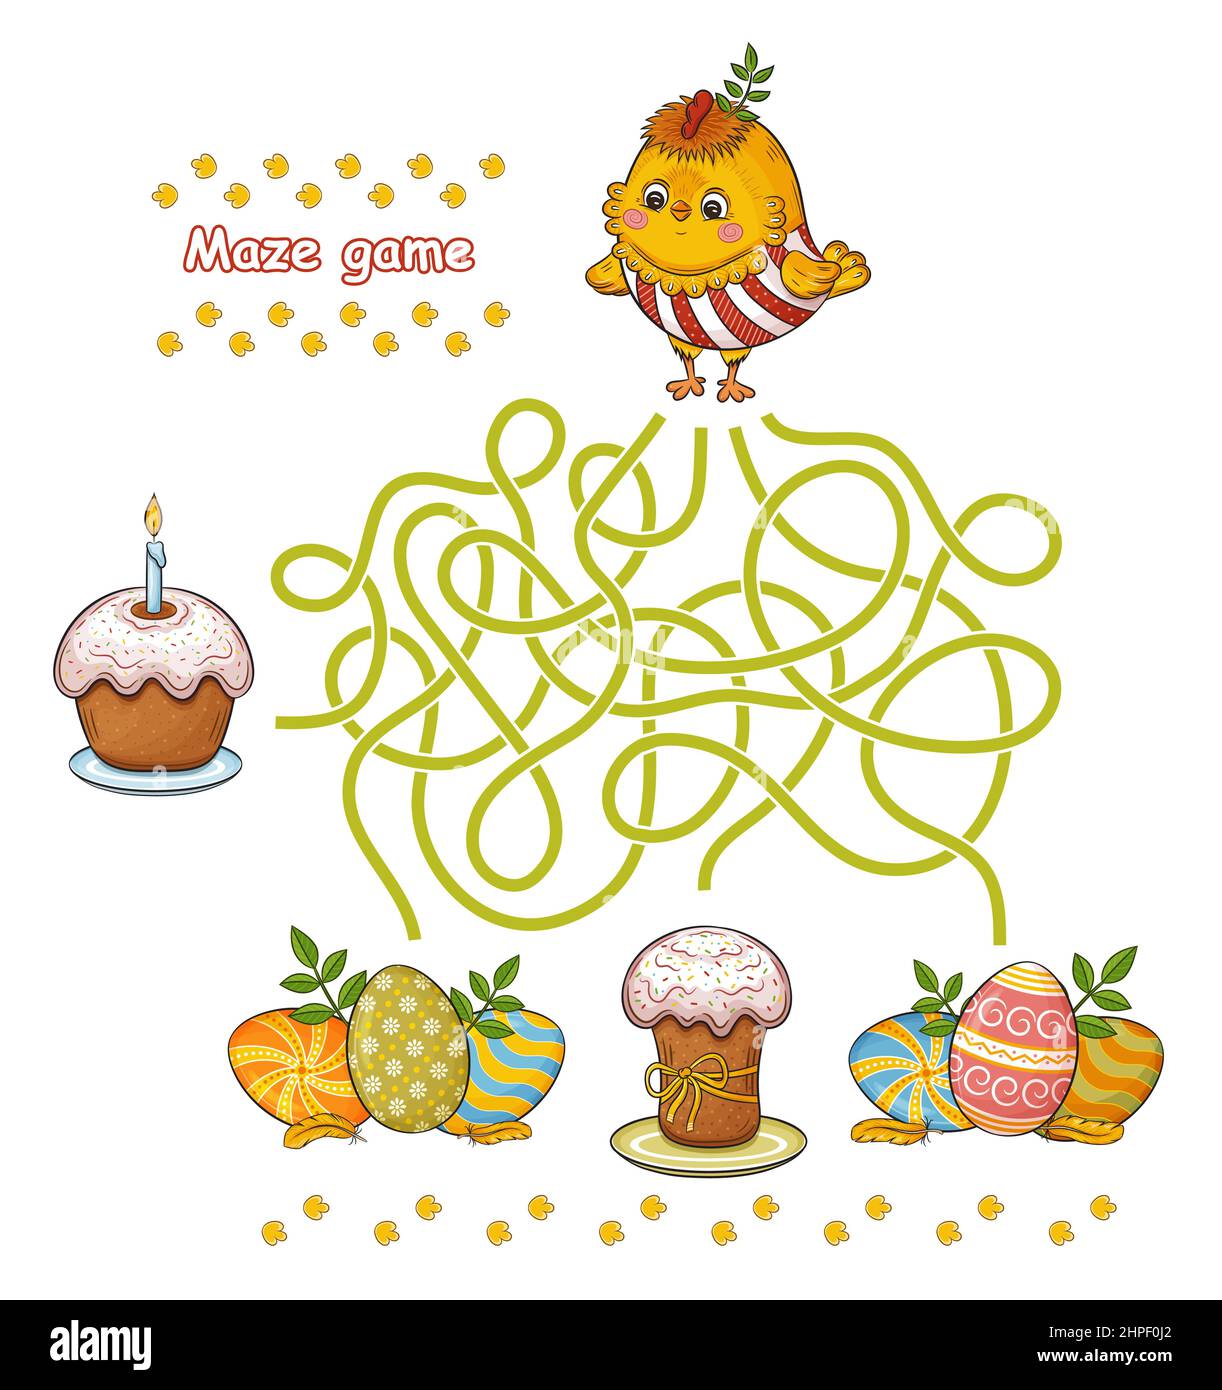 Maze education game. Help Easter rooster chicken find path to colored eggs, holiday paschal cake. Newborn chick bird. Children labyrinth puzzle vector Stock Vector